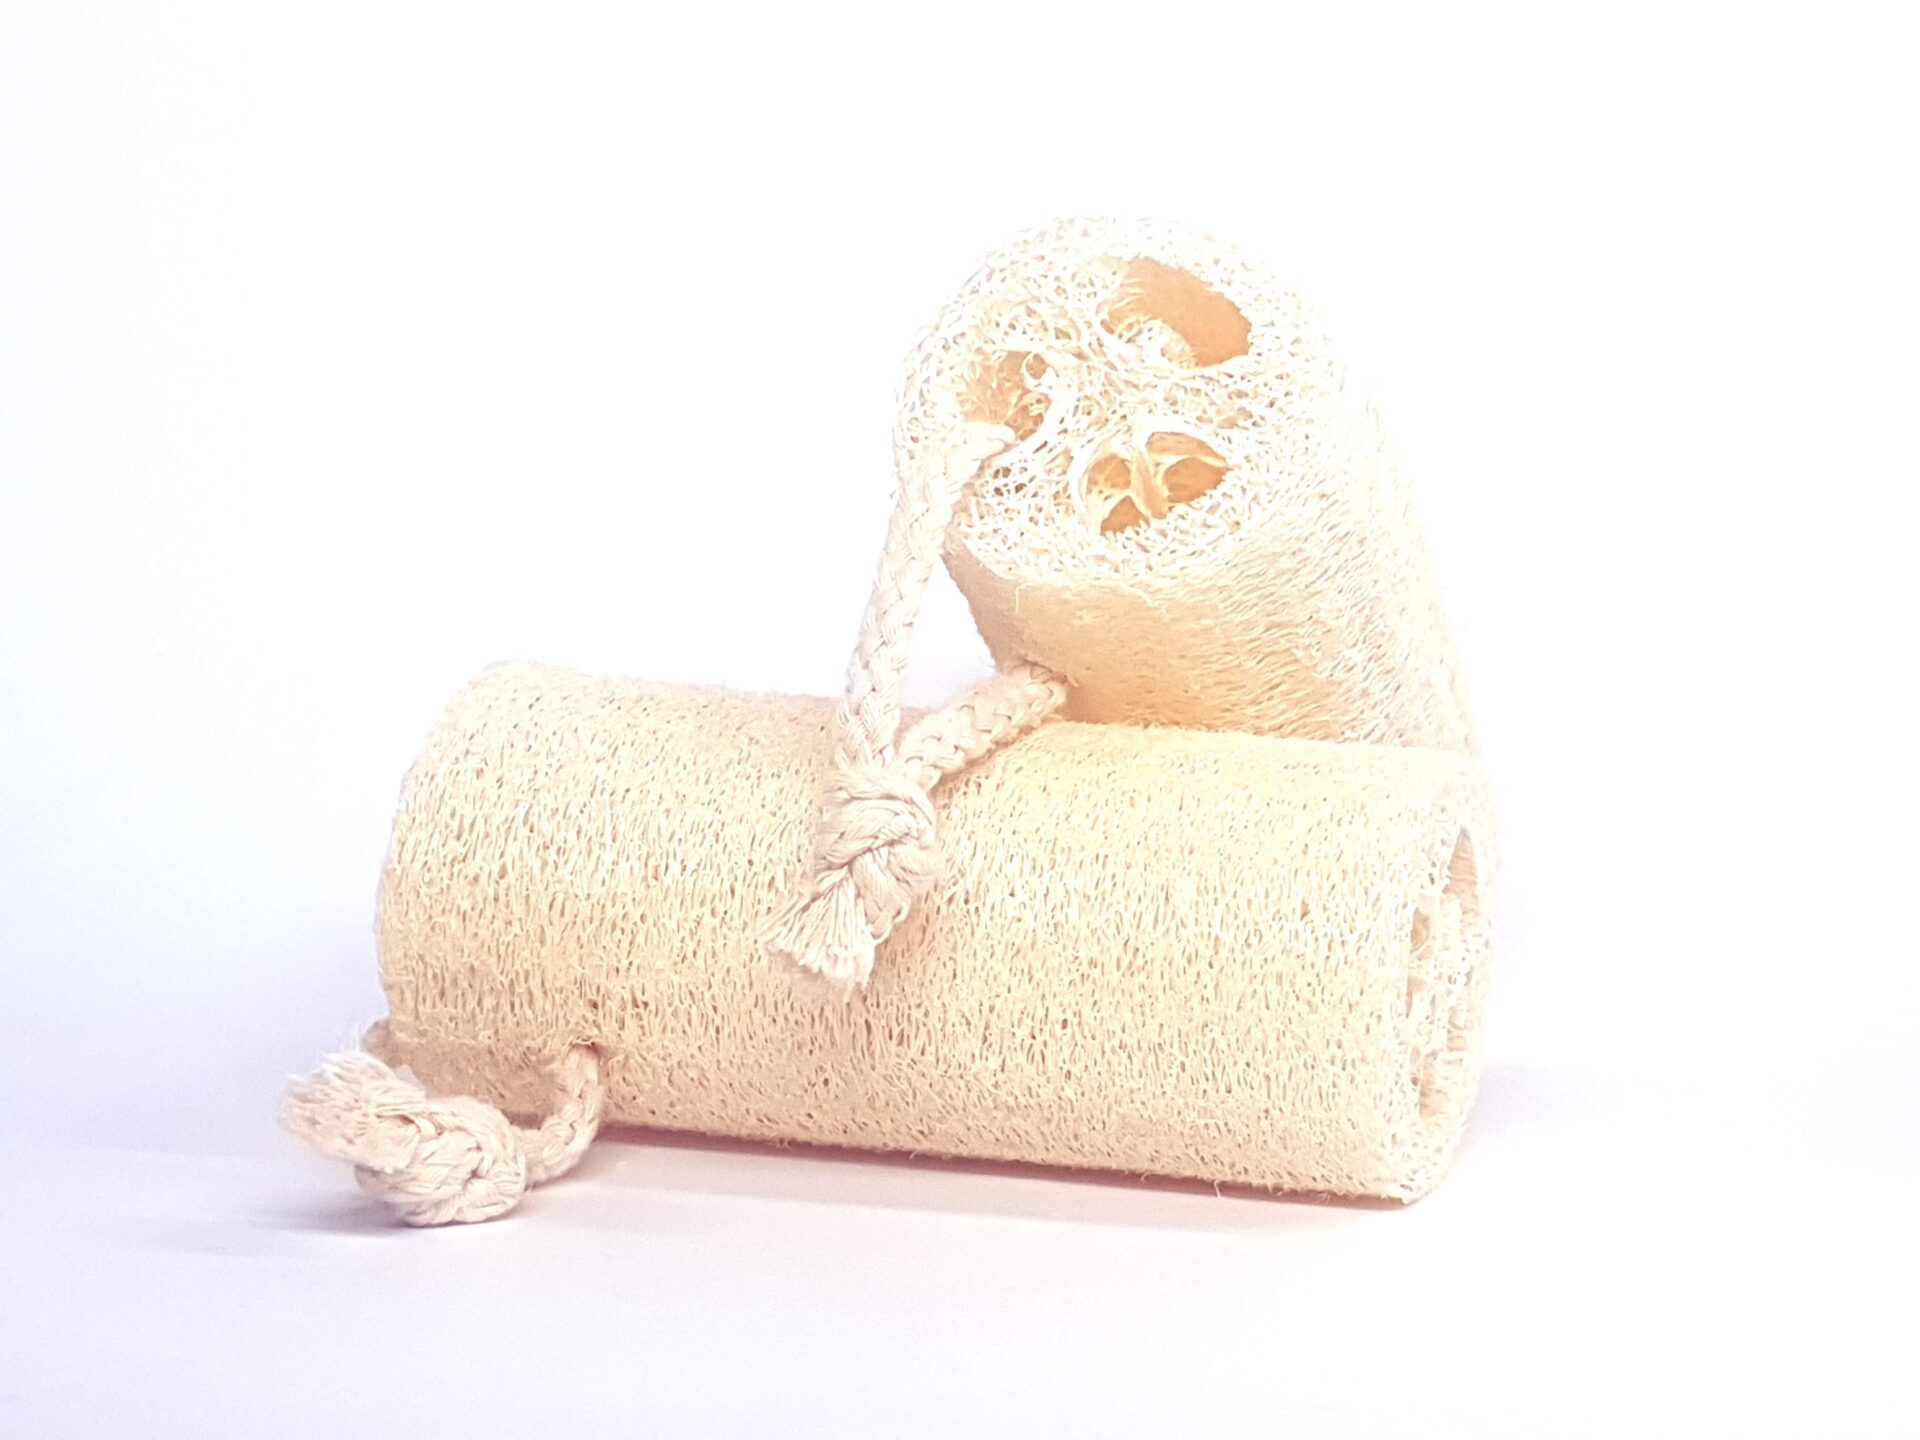 The BathCalm 5 inch Natural Loofah is wonderful natural exfoliant to smooth out those rough areas such as heels and elbows. It can be composted when finished with, with recommended regular washing to keep it bacteria free.